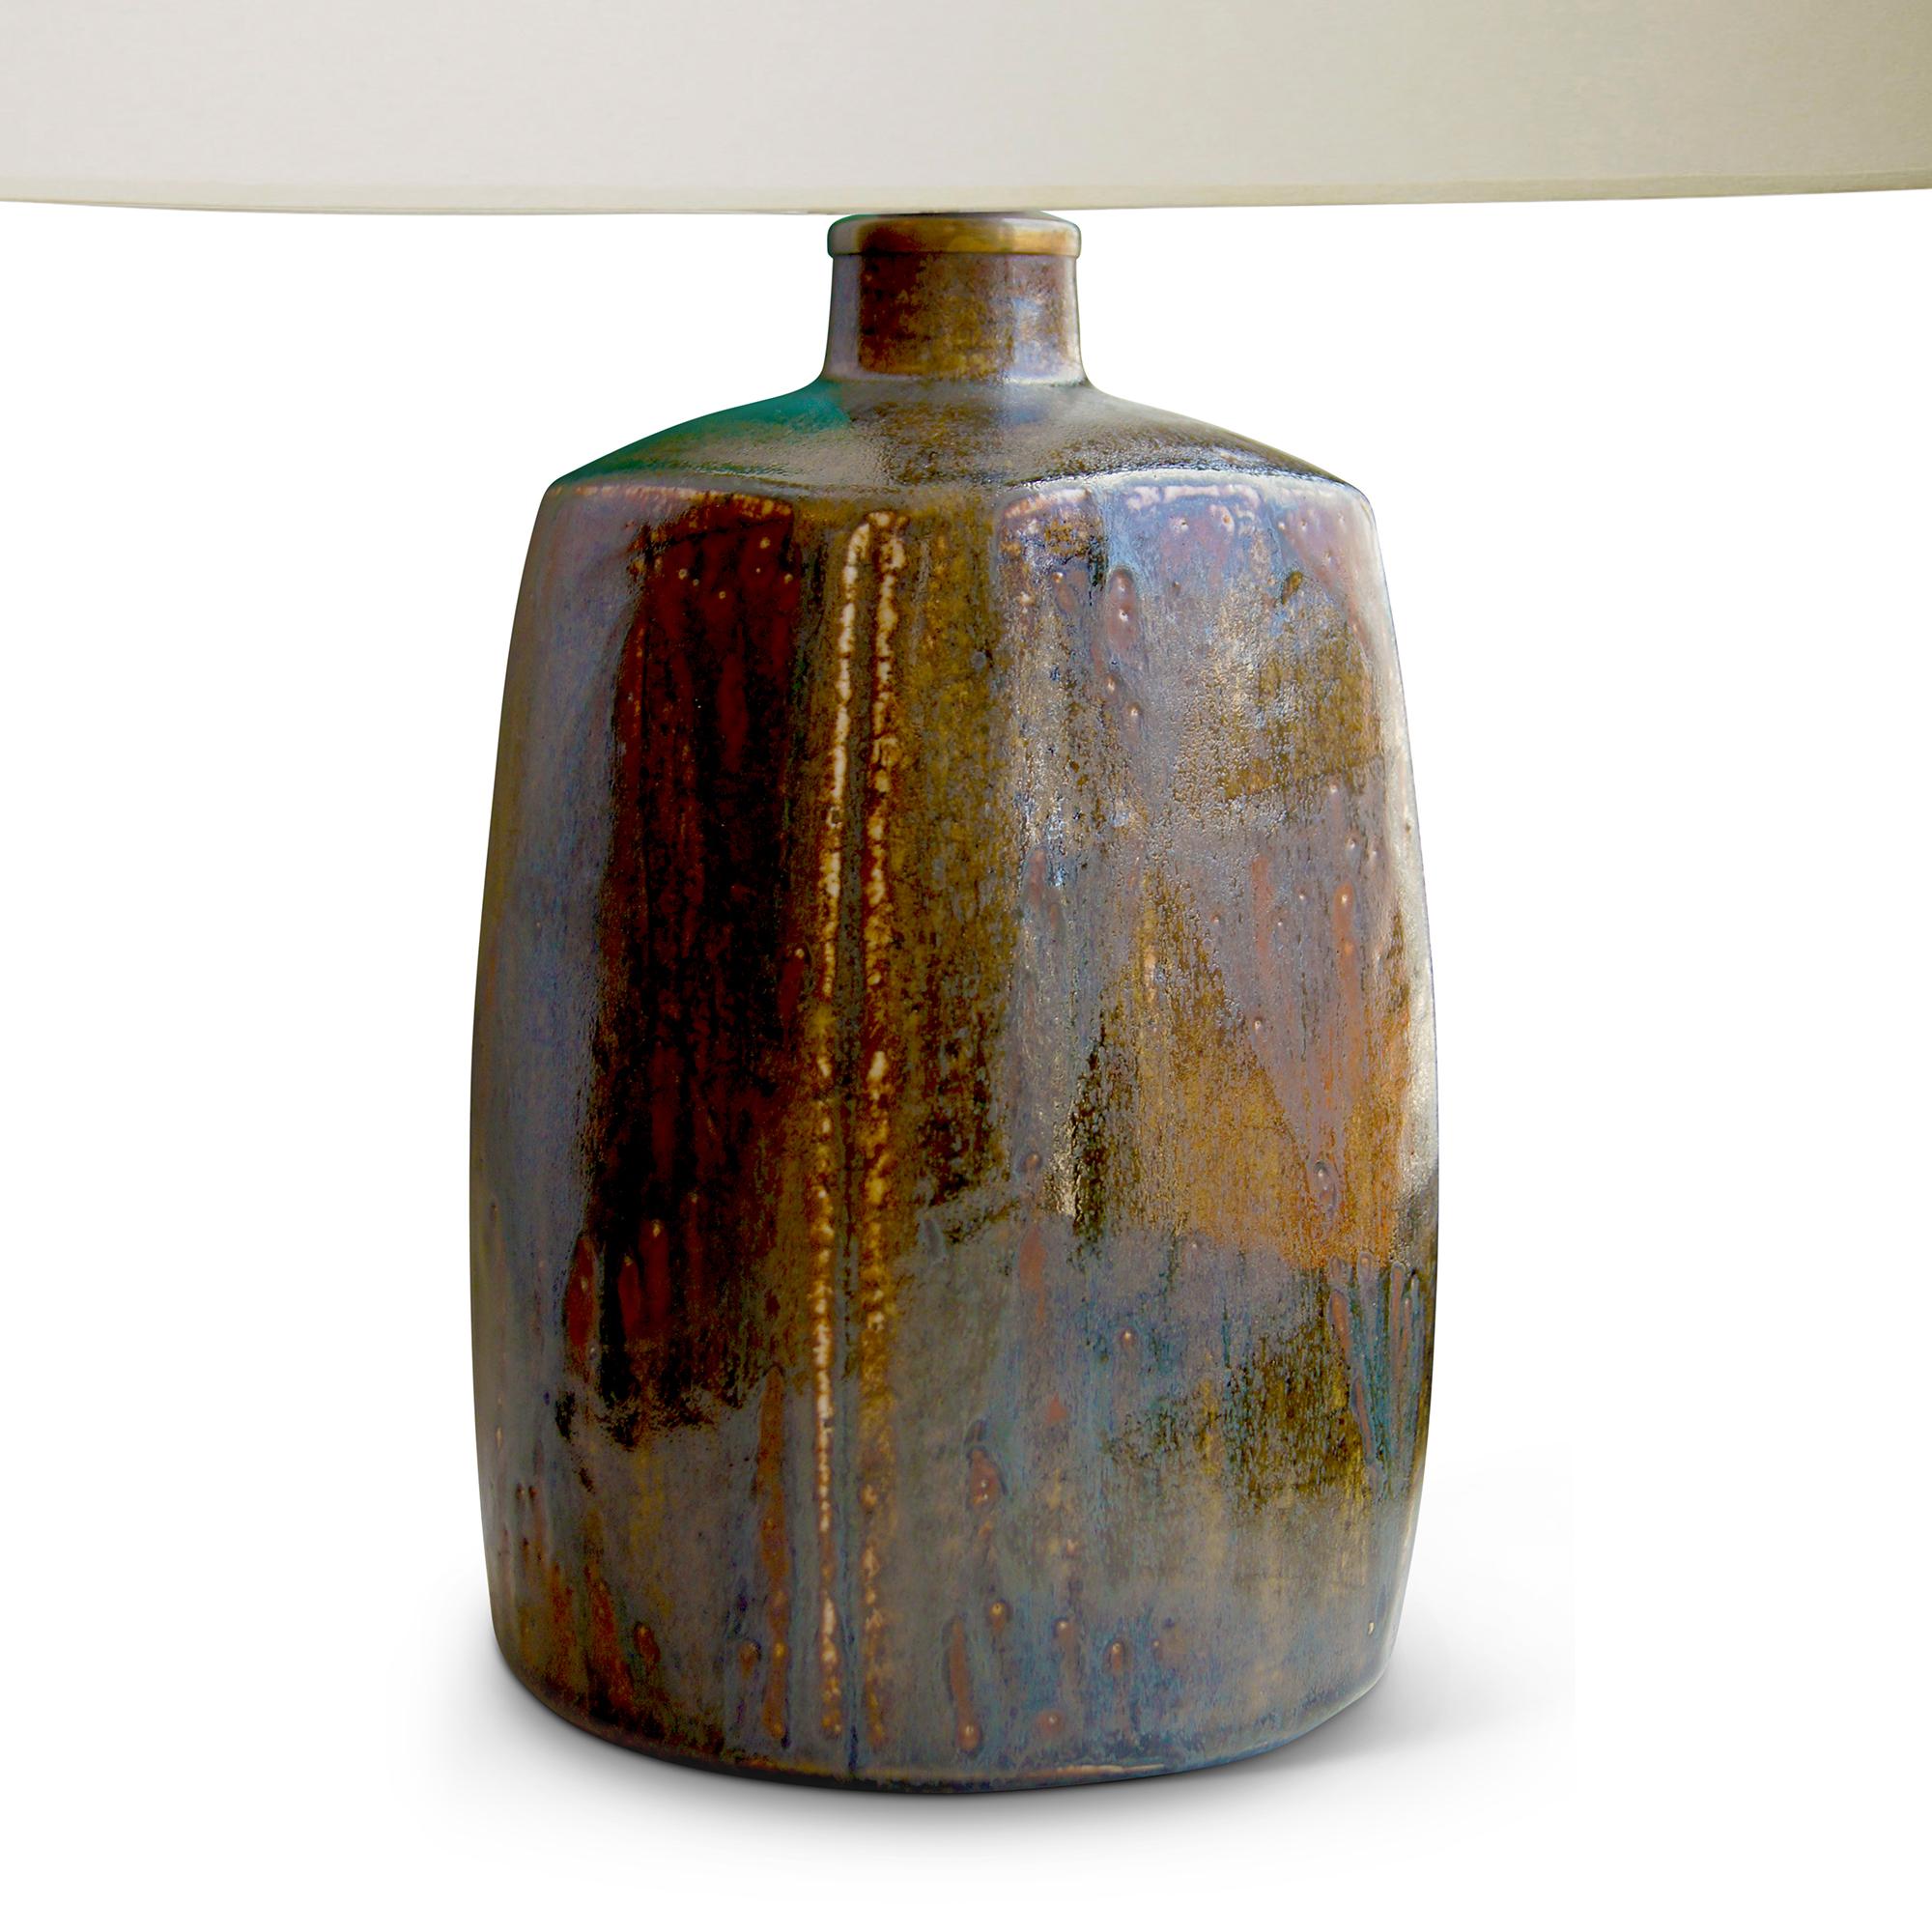 Table lamp by pioneering ceramist designer Eva Staehr Nielsen (1911-1976) for Saxbo, with an organically modeled rectangular base with swelling convex sides and plant-like creases along its corners, crafted in stoneware glazed in a lustrous raw